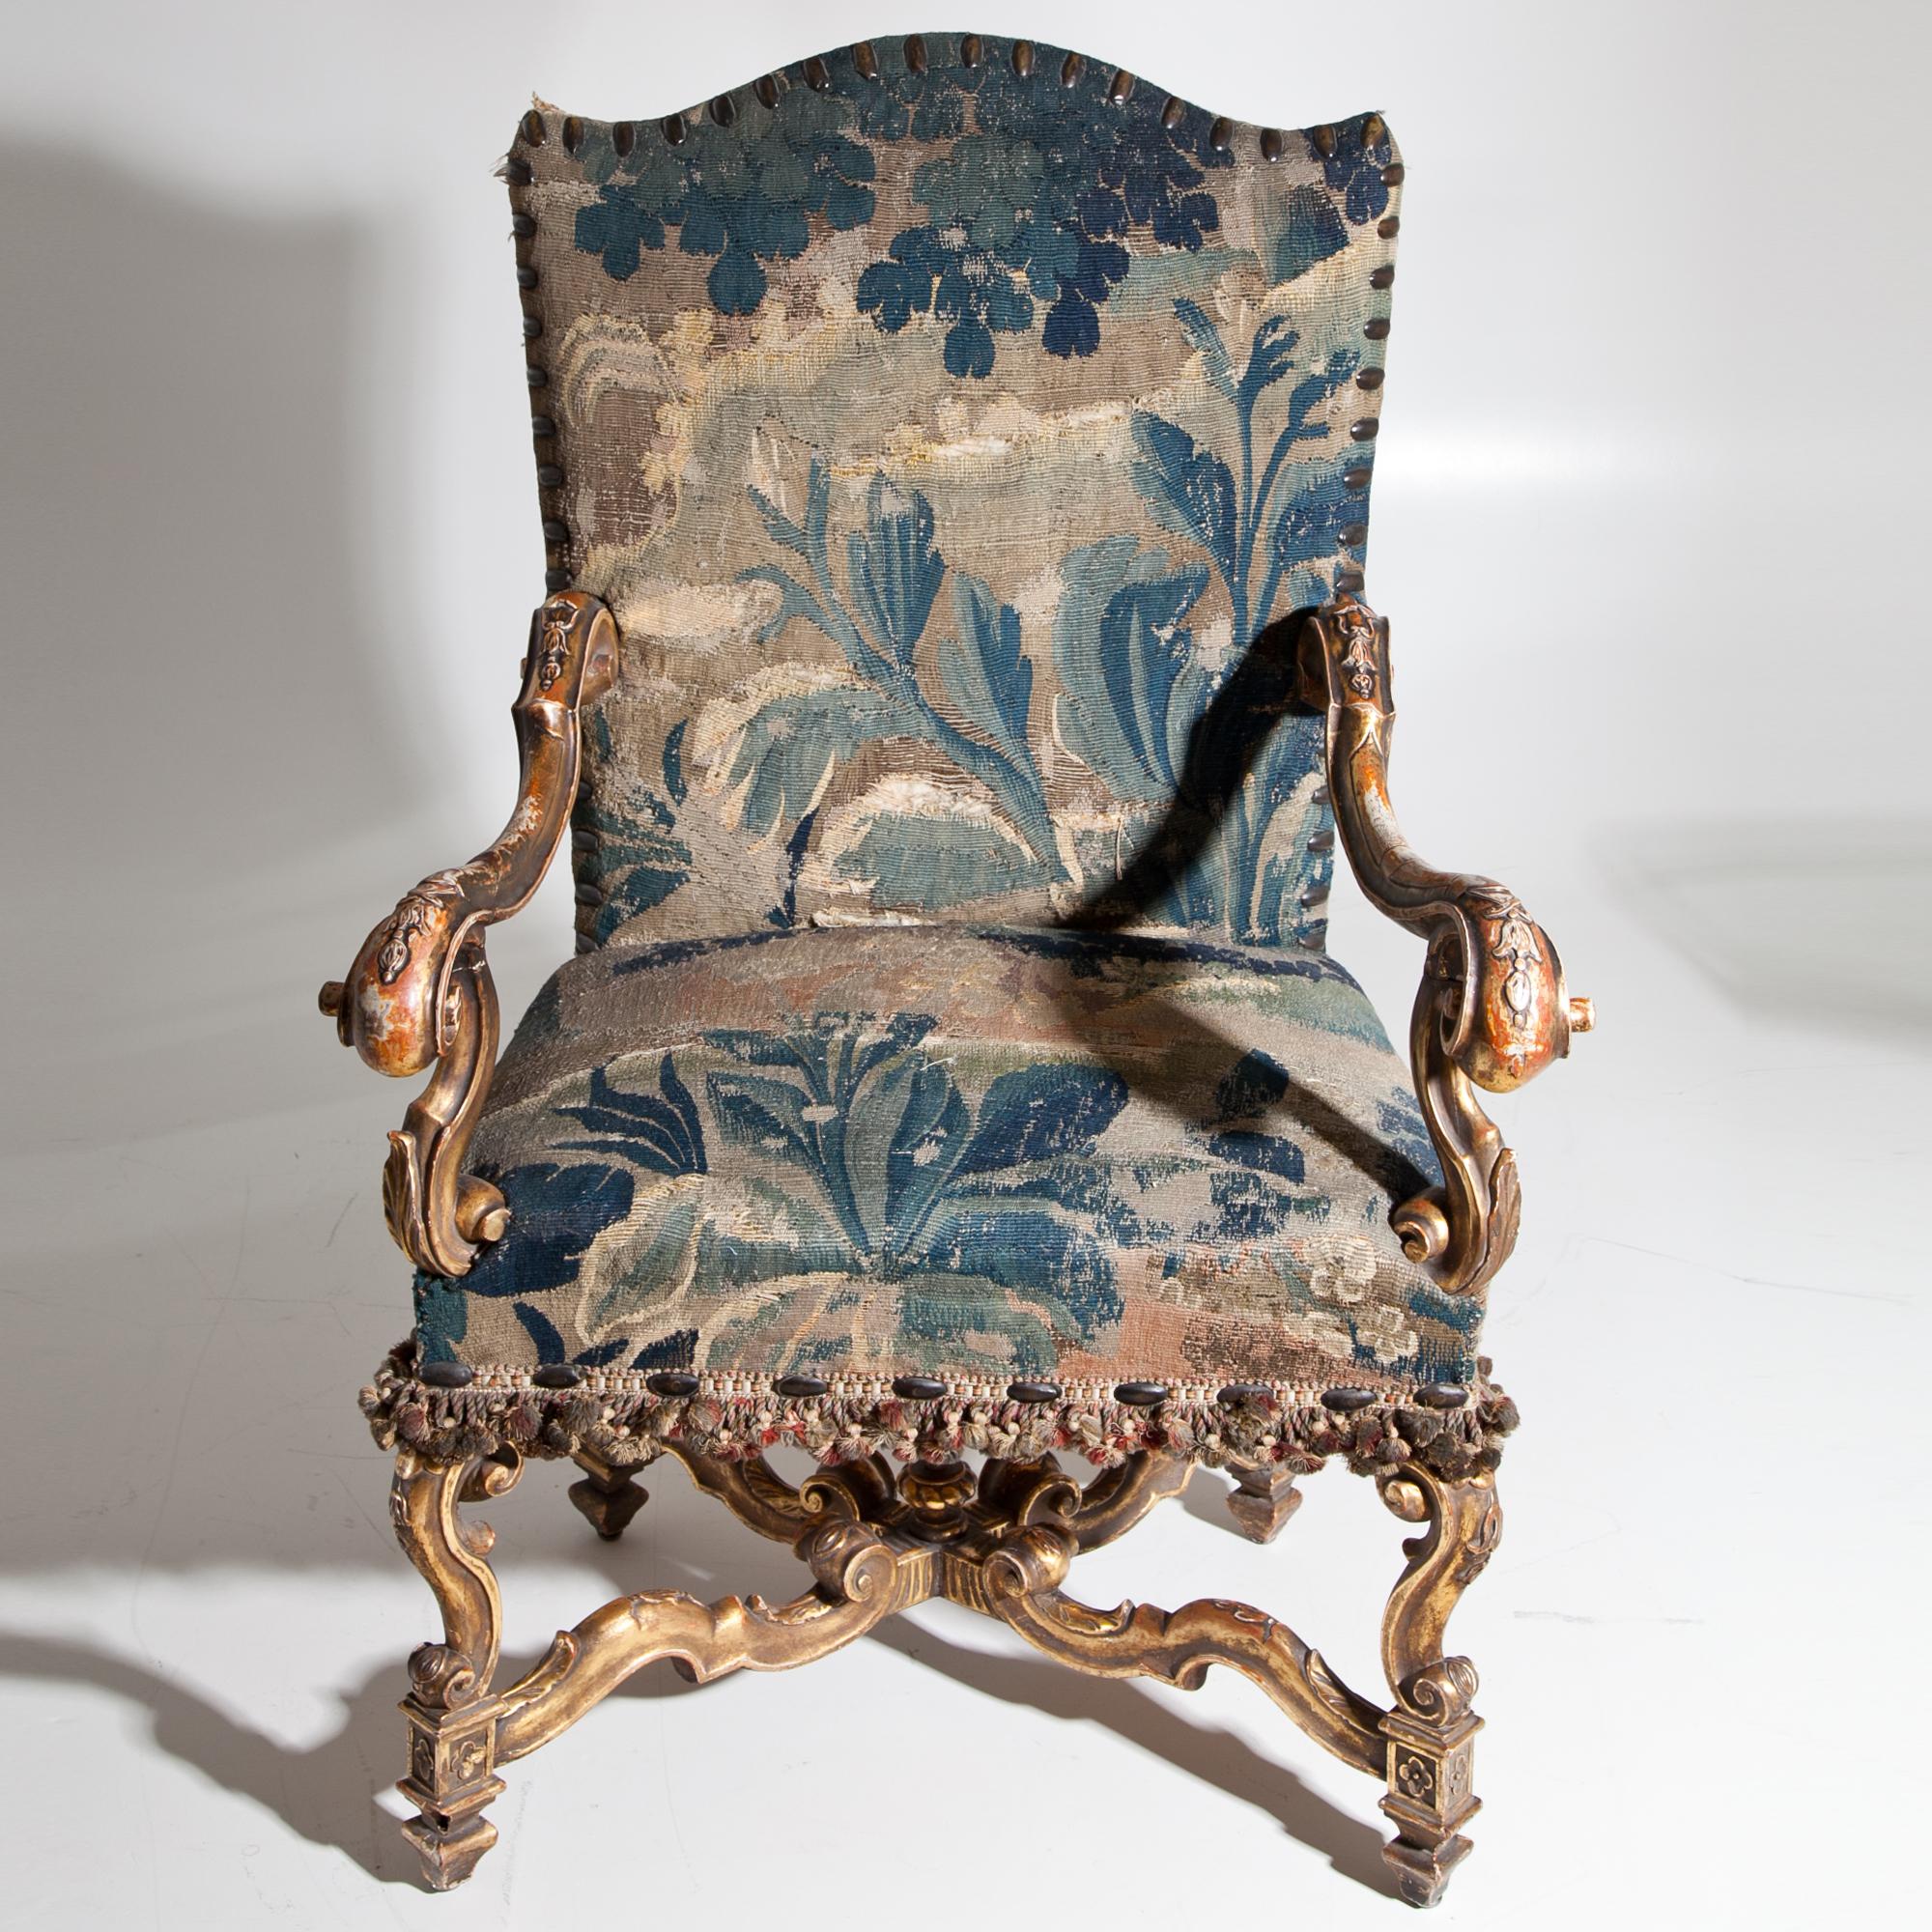 Gilt armchair upholstered with a blue-beige gobelin, standing on a carved base with X-strutting. The armrests end in volutes circa 18th-19th century.